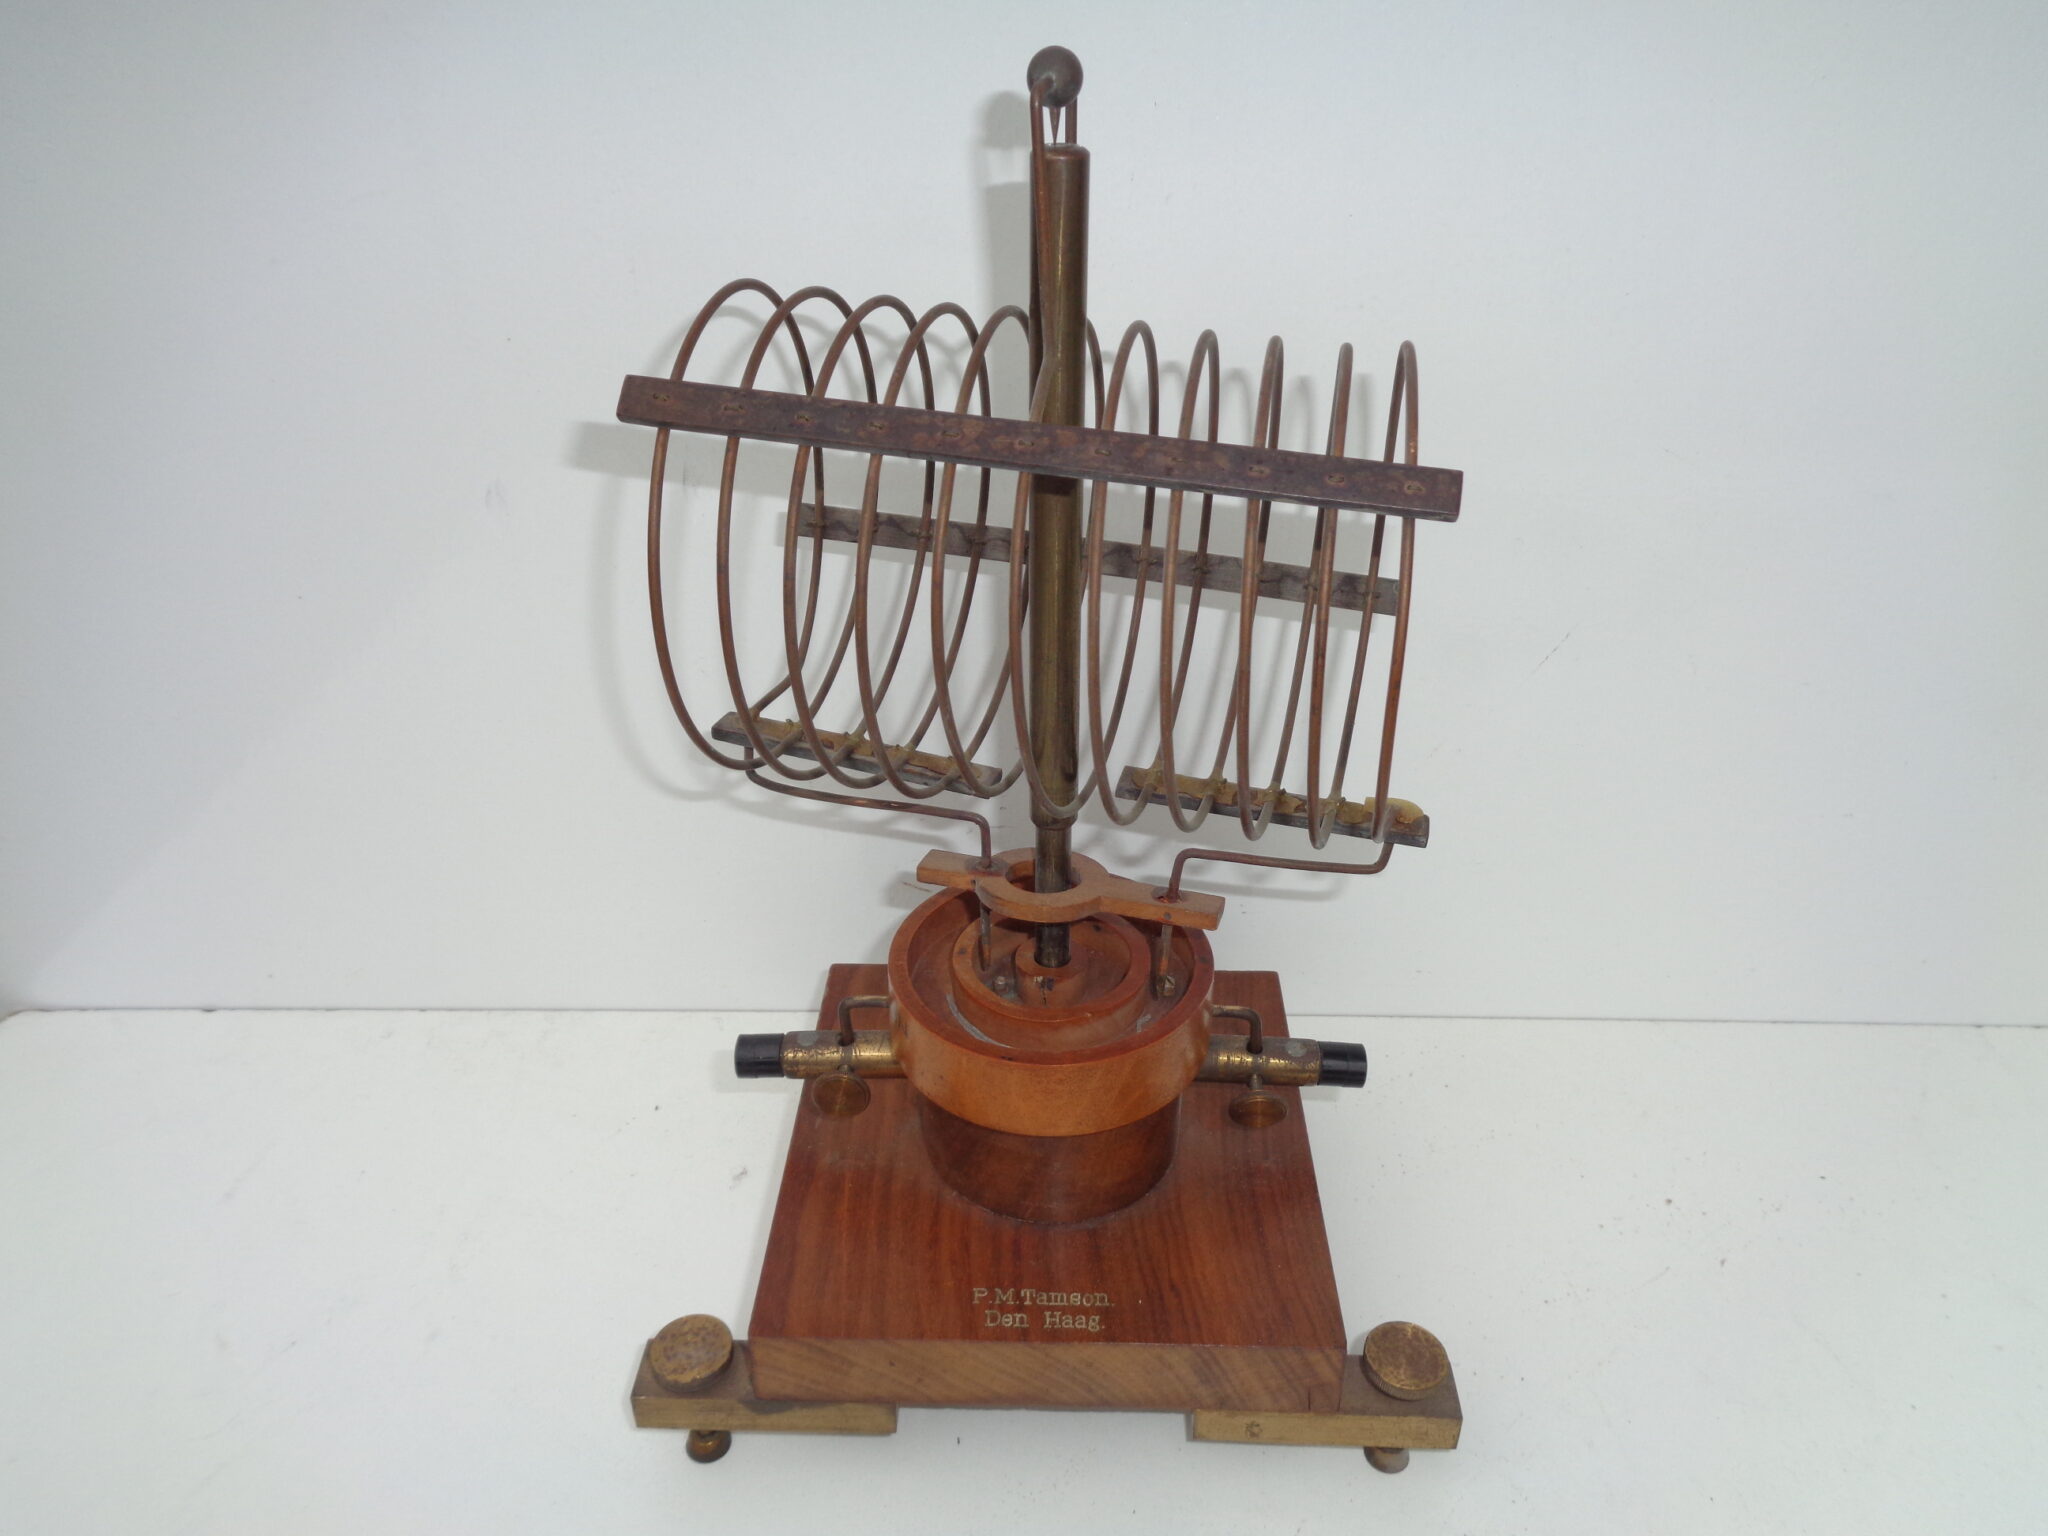 Device for demonstrating electro magnetic fields by TAMSON den HAAG